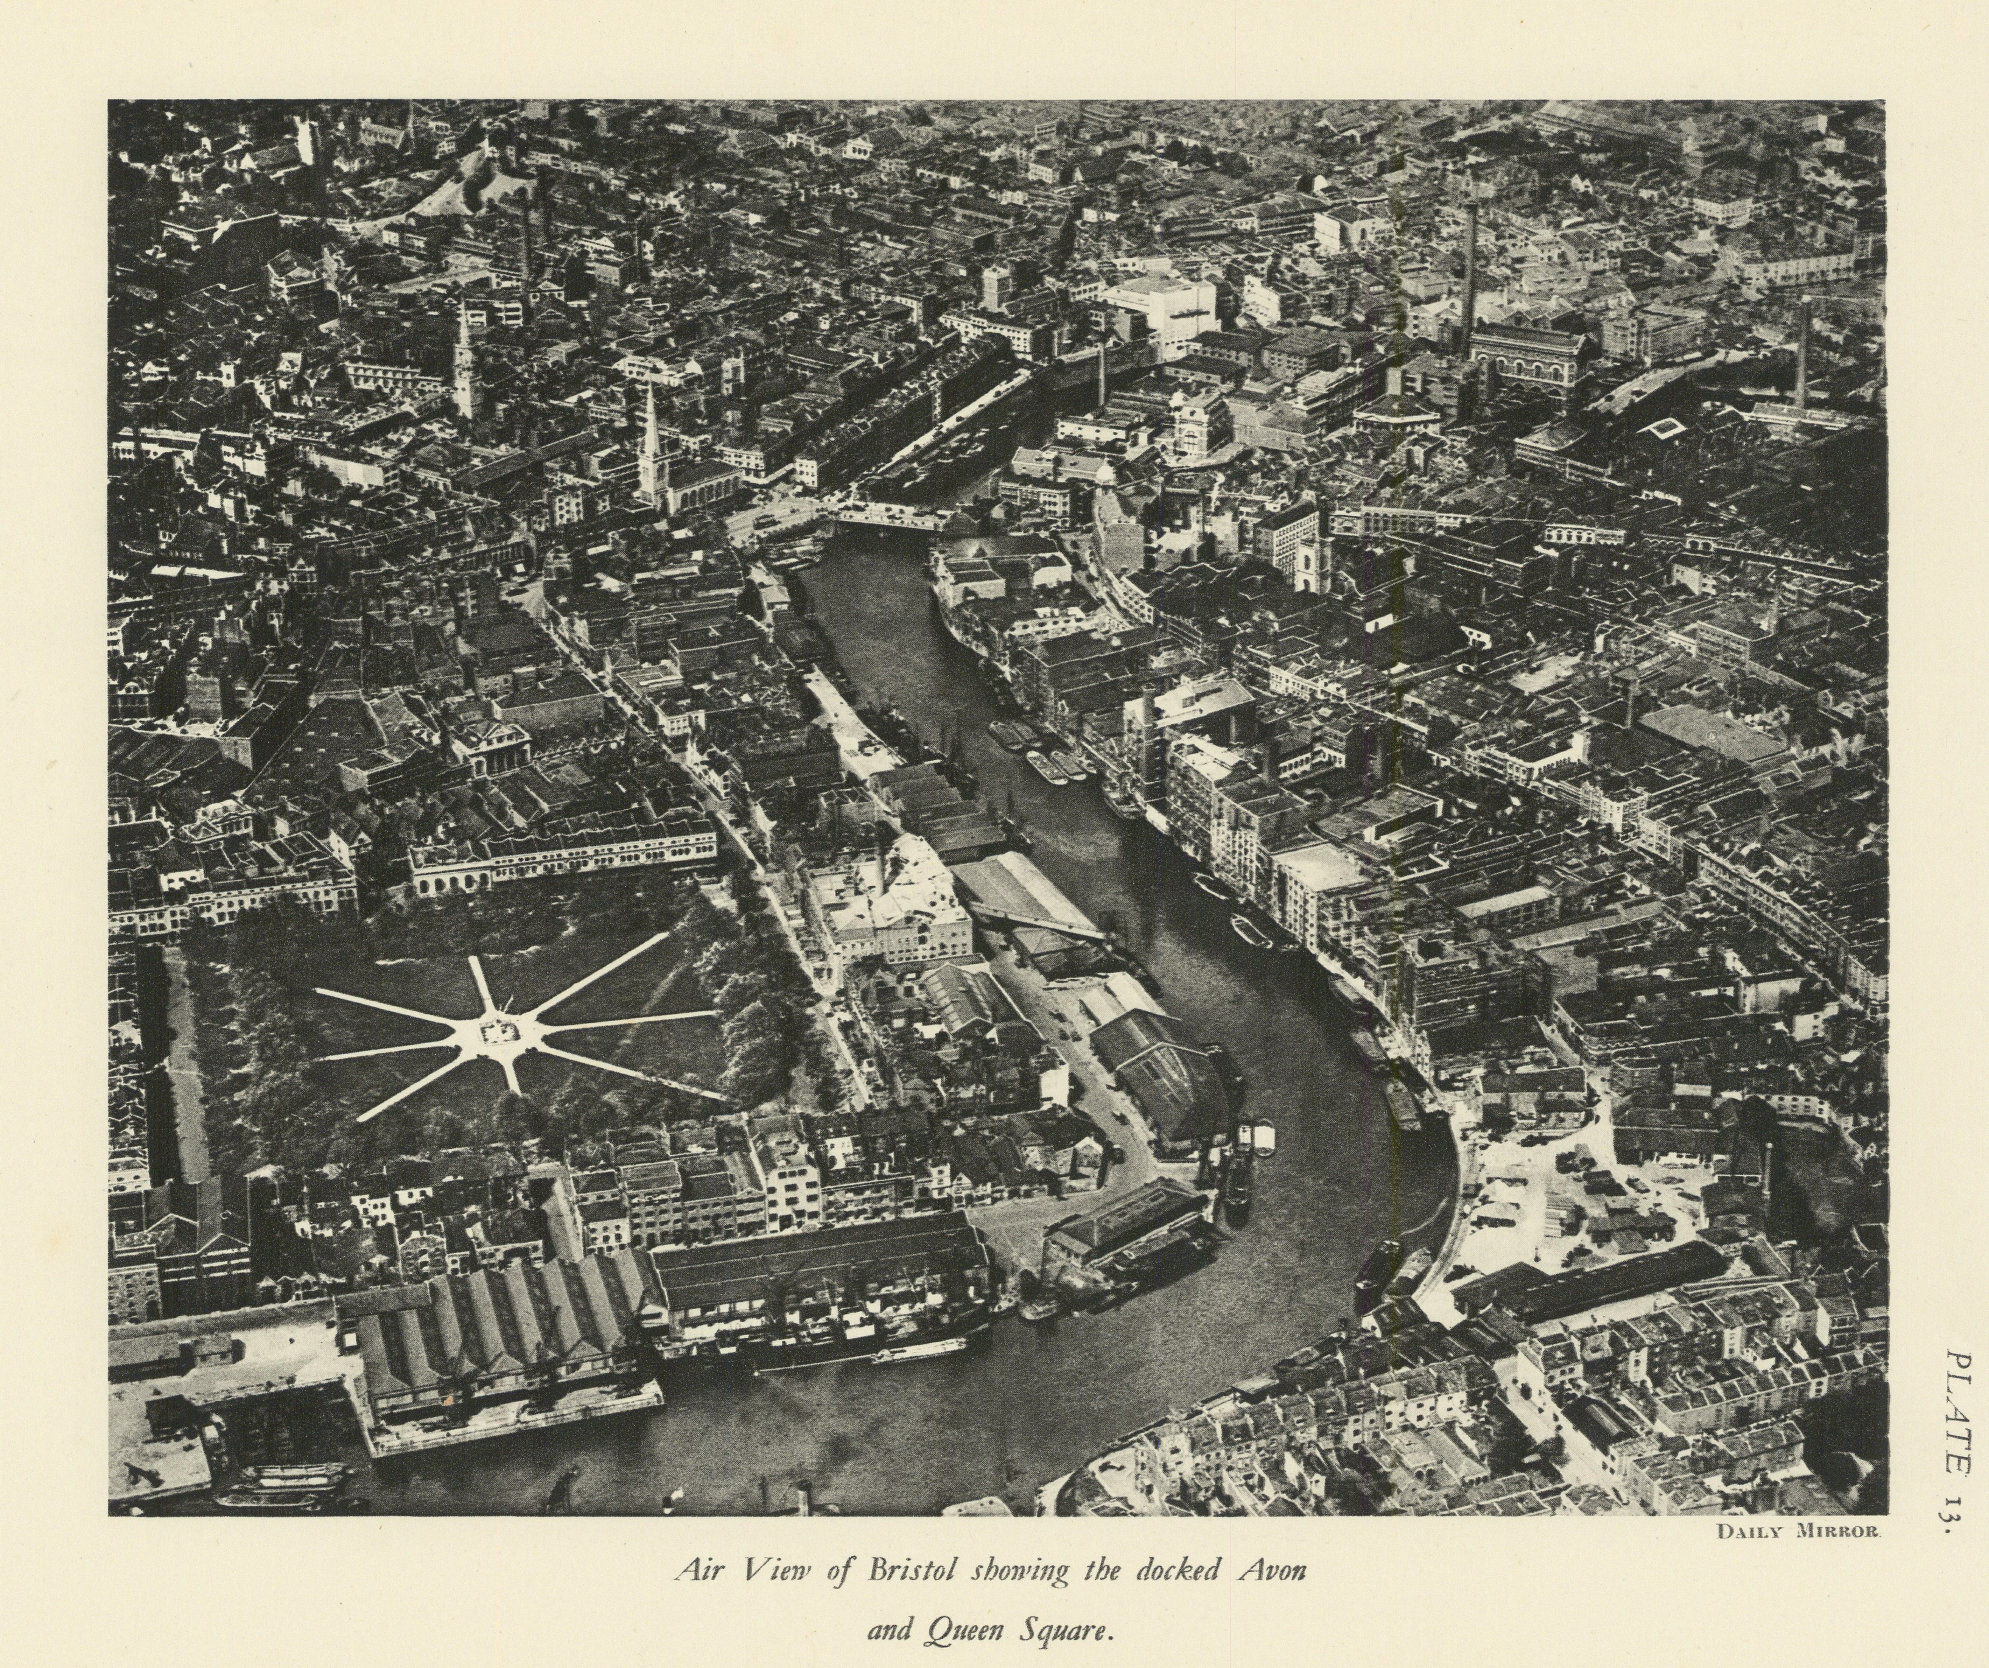 Air View of Bristol showing the docked Avon & Queen Square 1930 old print